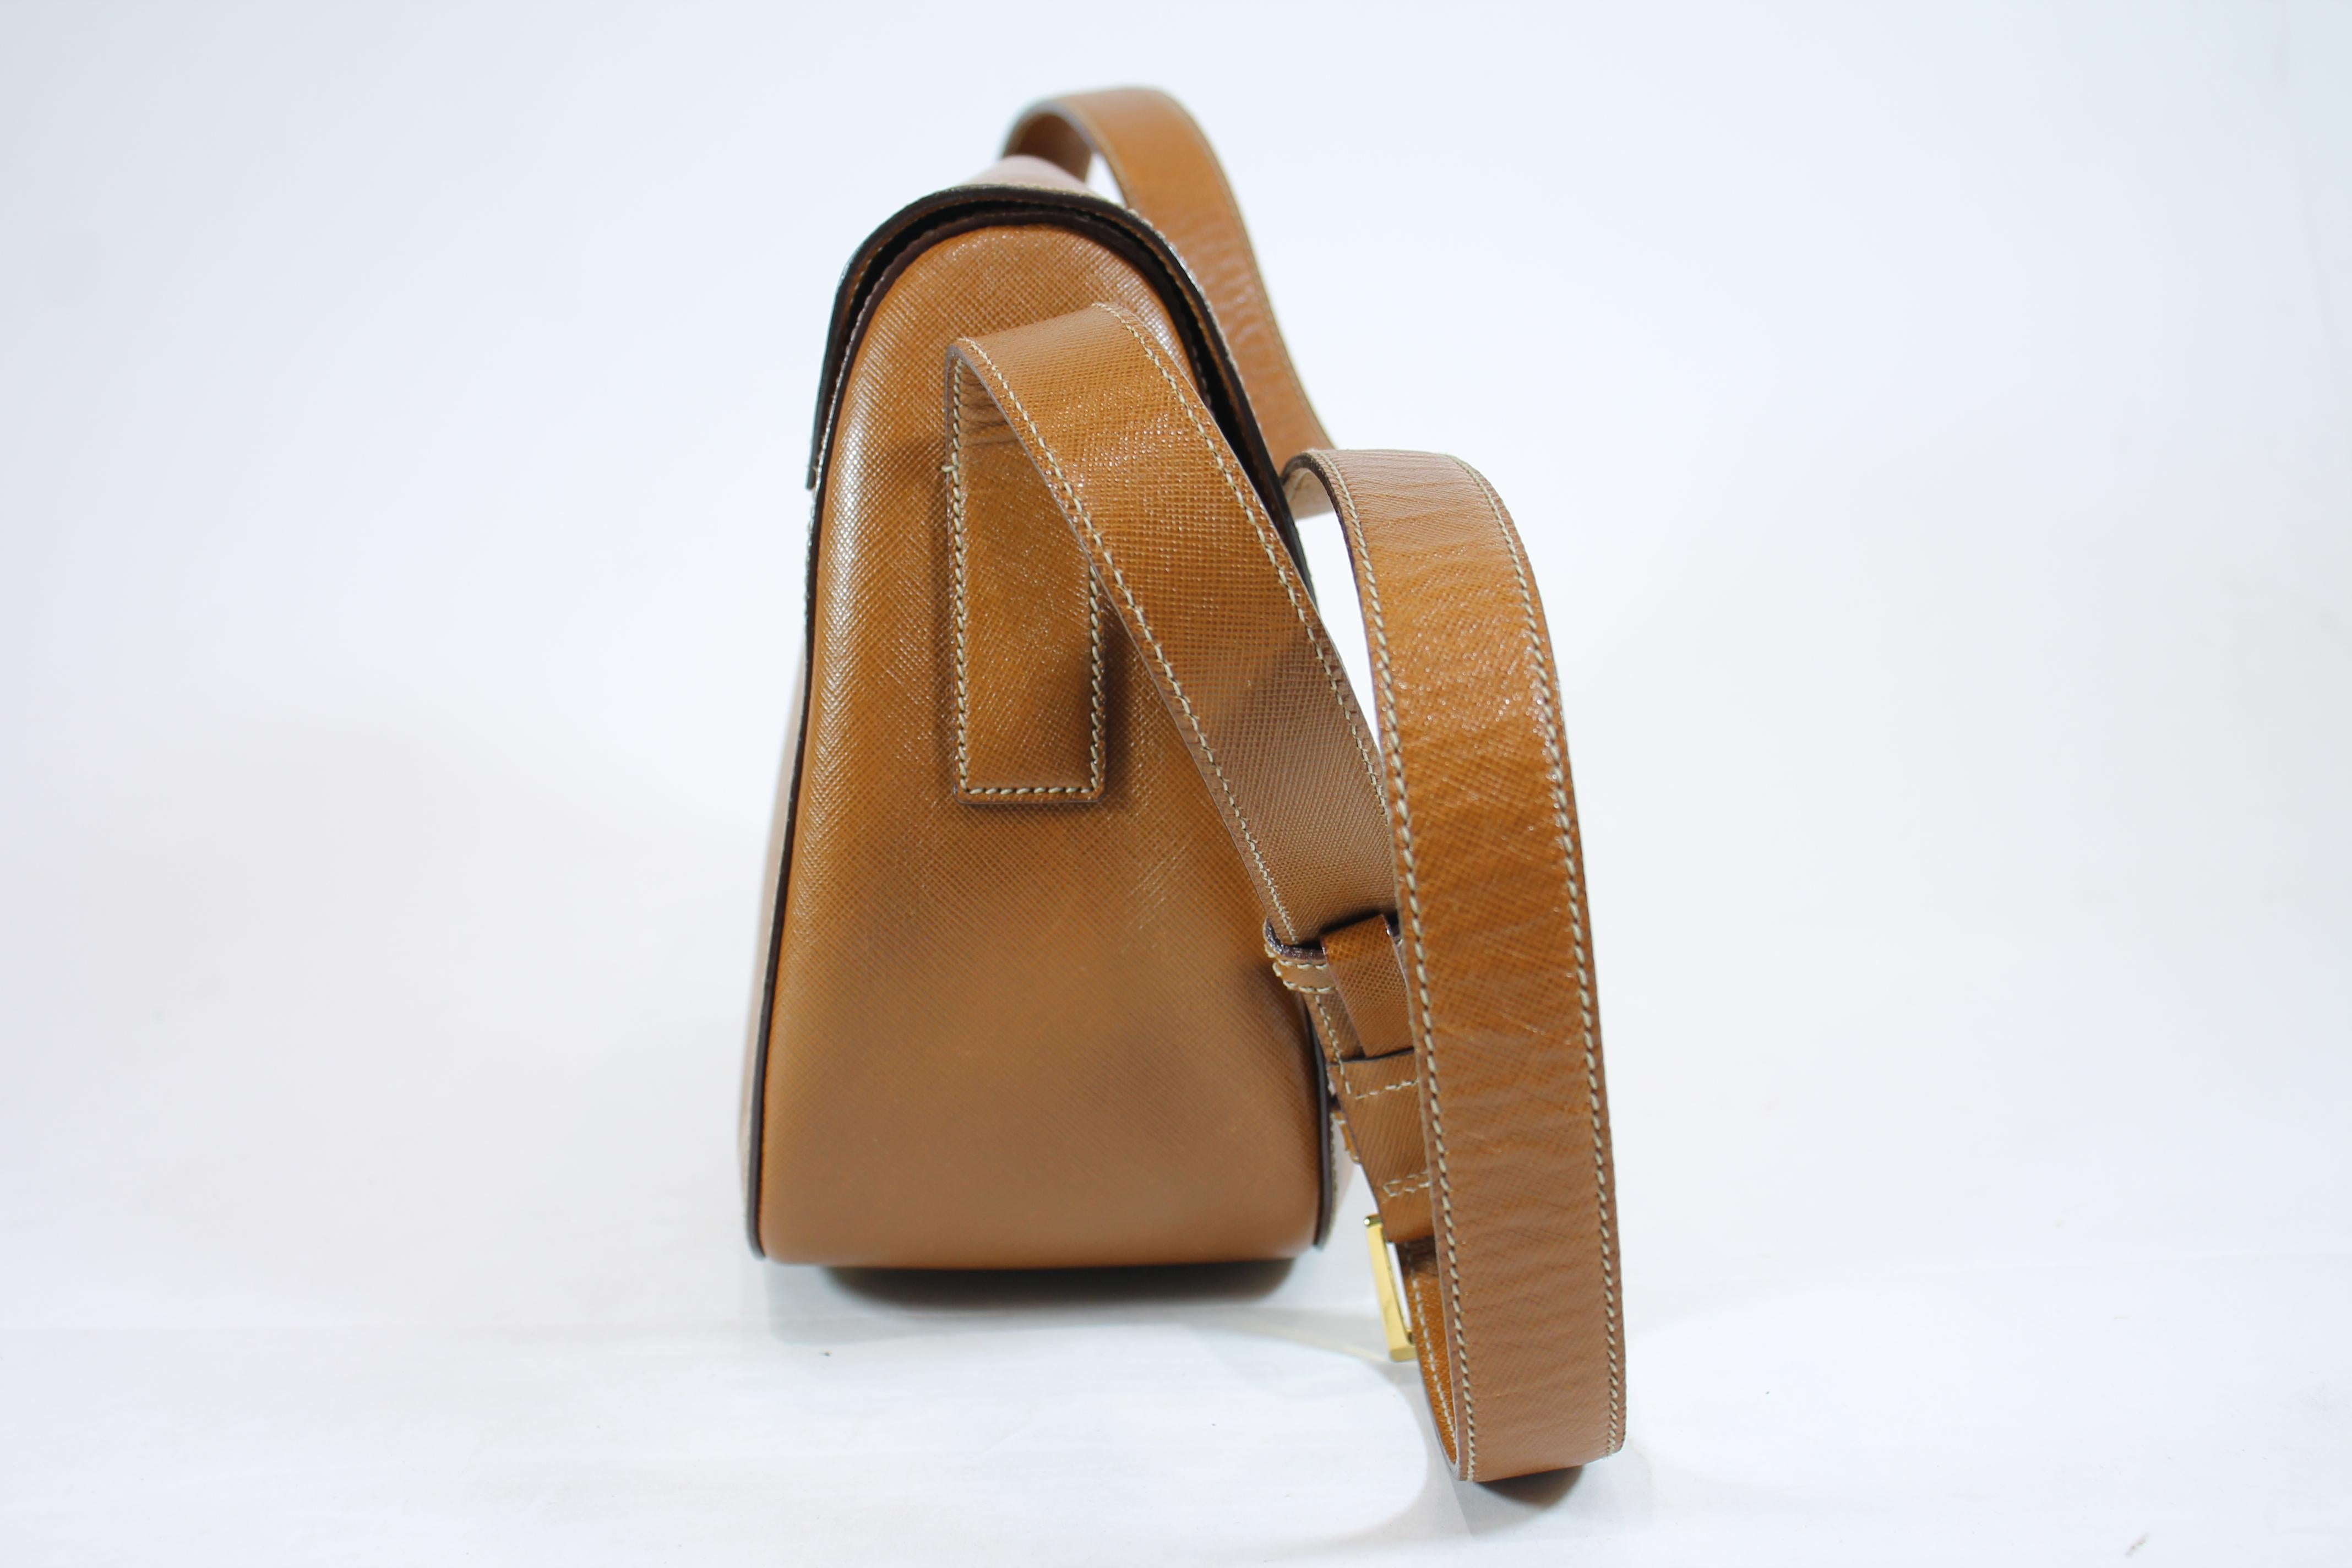 Brown camel grained leather. Gold-tone hardware. Front flap with push lock closure with prada engraved logo. Adjustable flat shoulder strap. One interior zippered pocket. Protective feet at base.